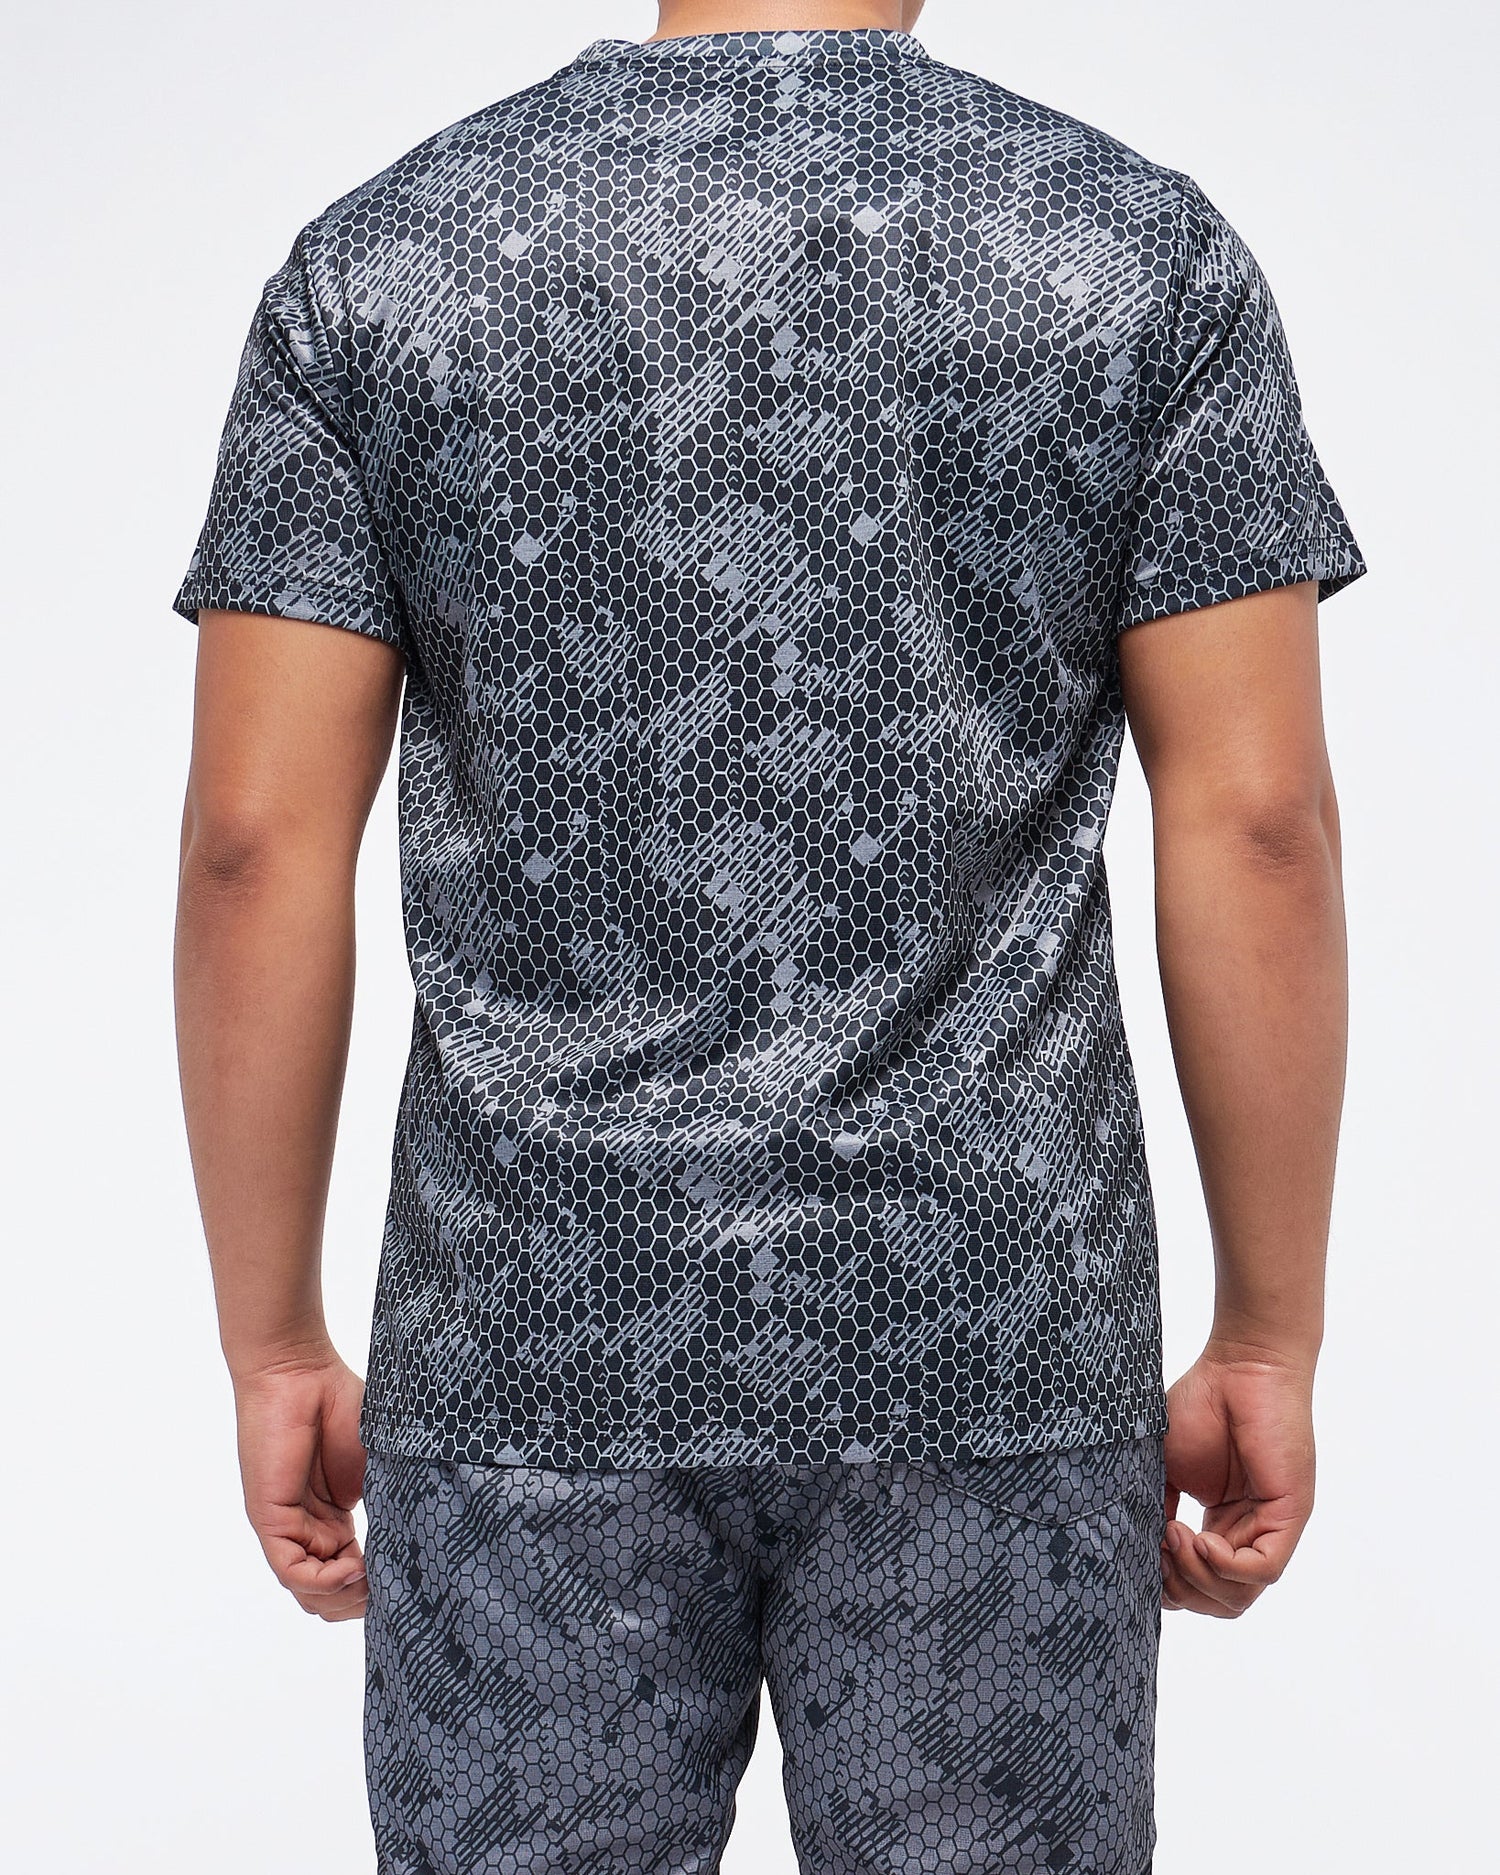 MOI OUTFIT-Texture Full Printed Men T-Shirt 12.90